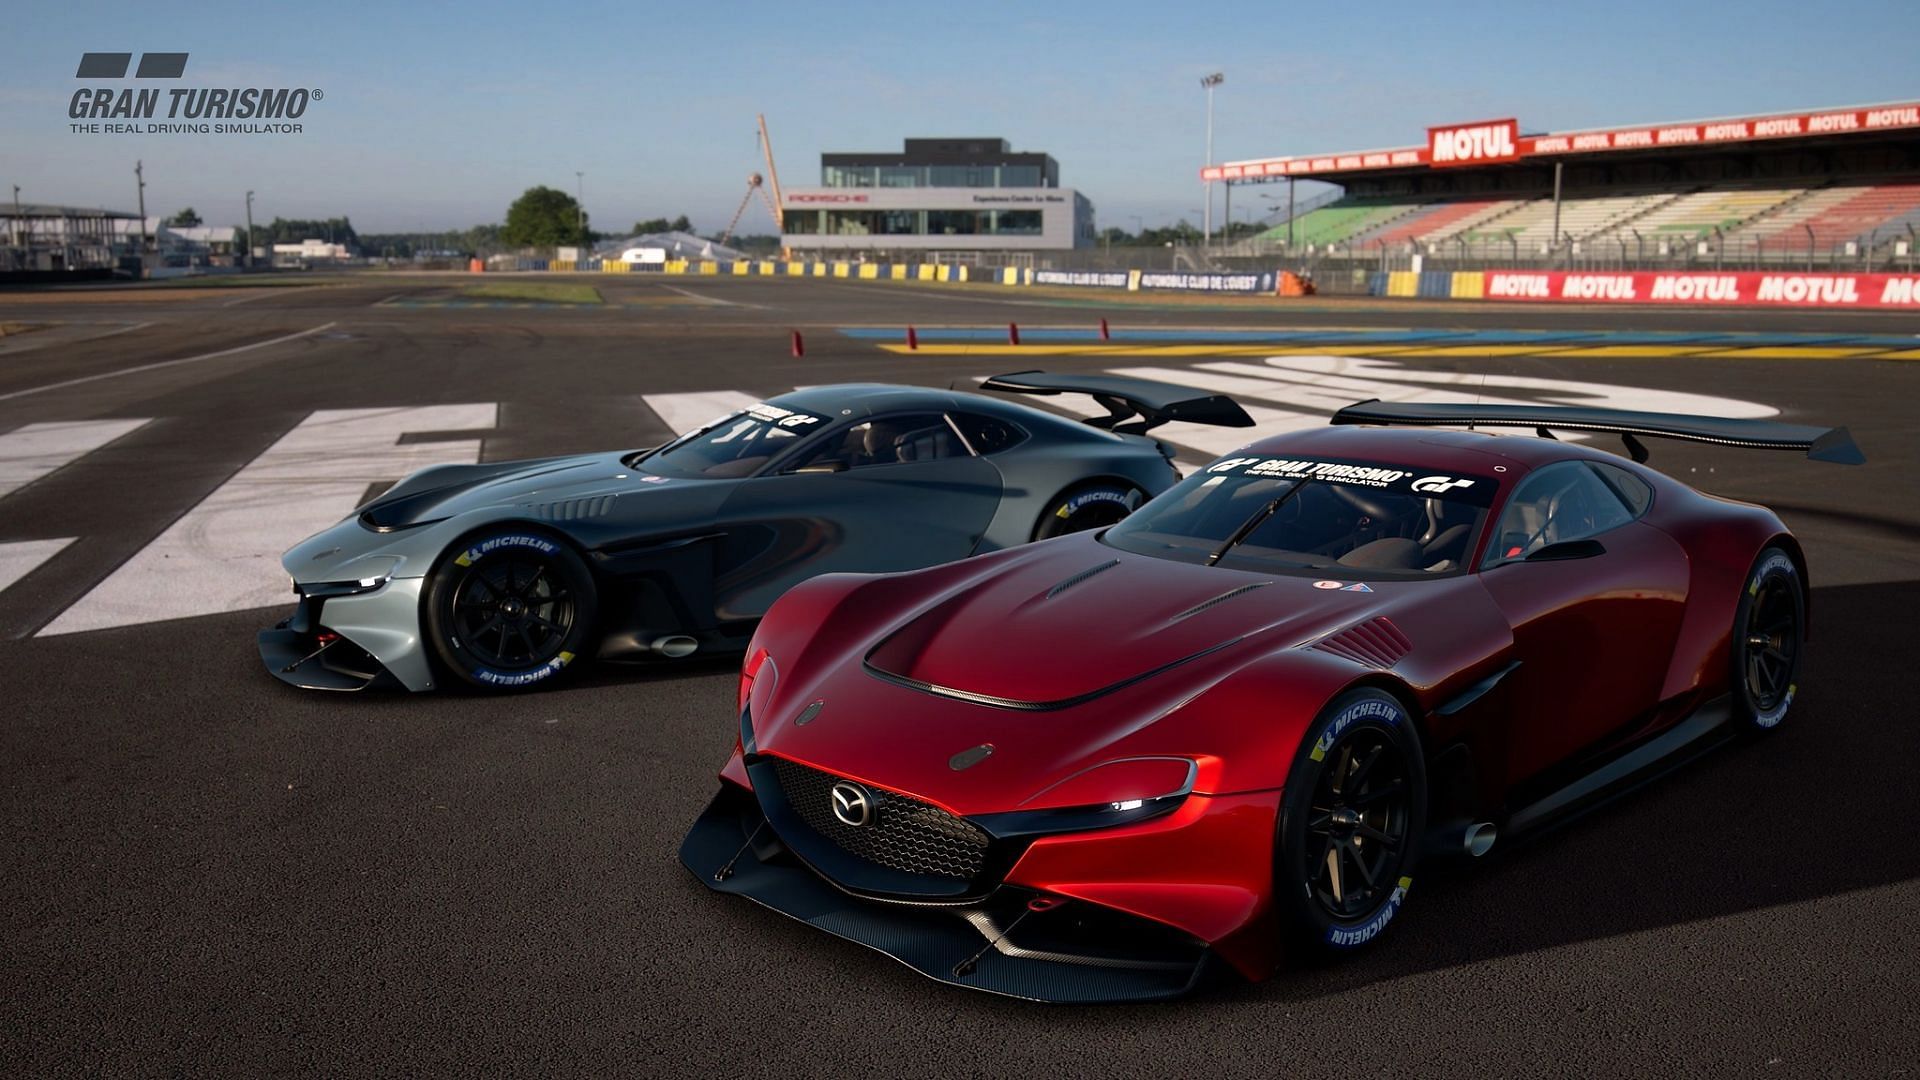 GT Sport has been delisted from the PlayStation Store, with the game